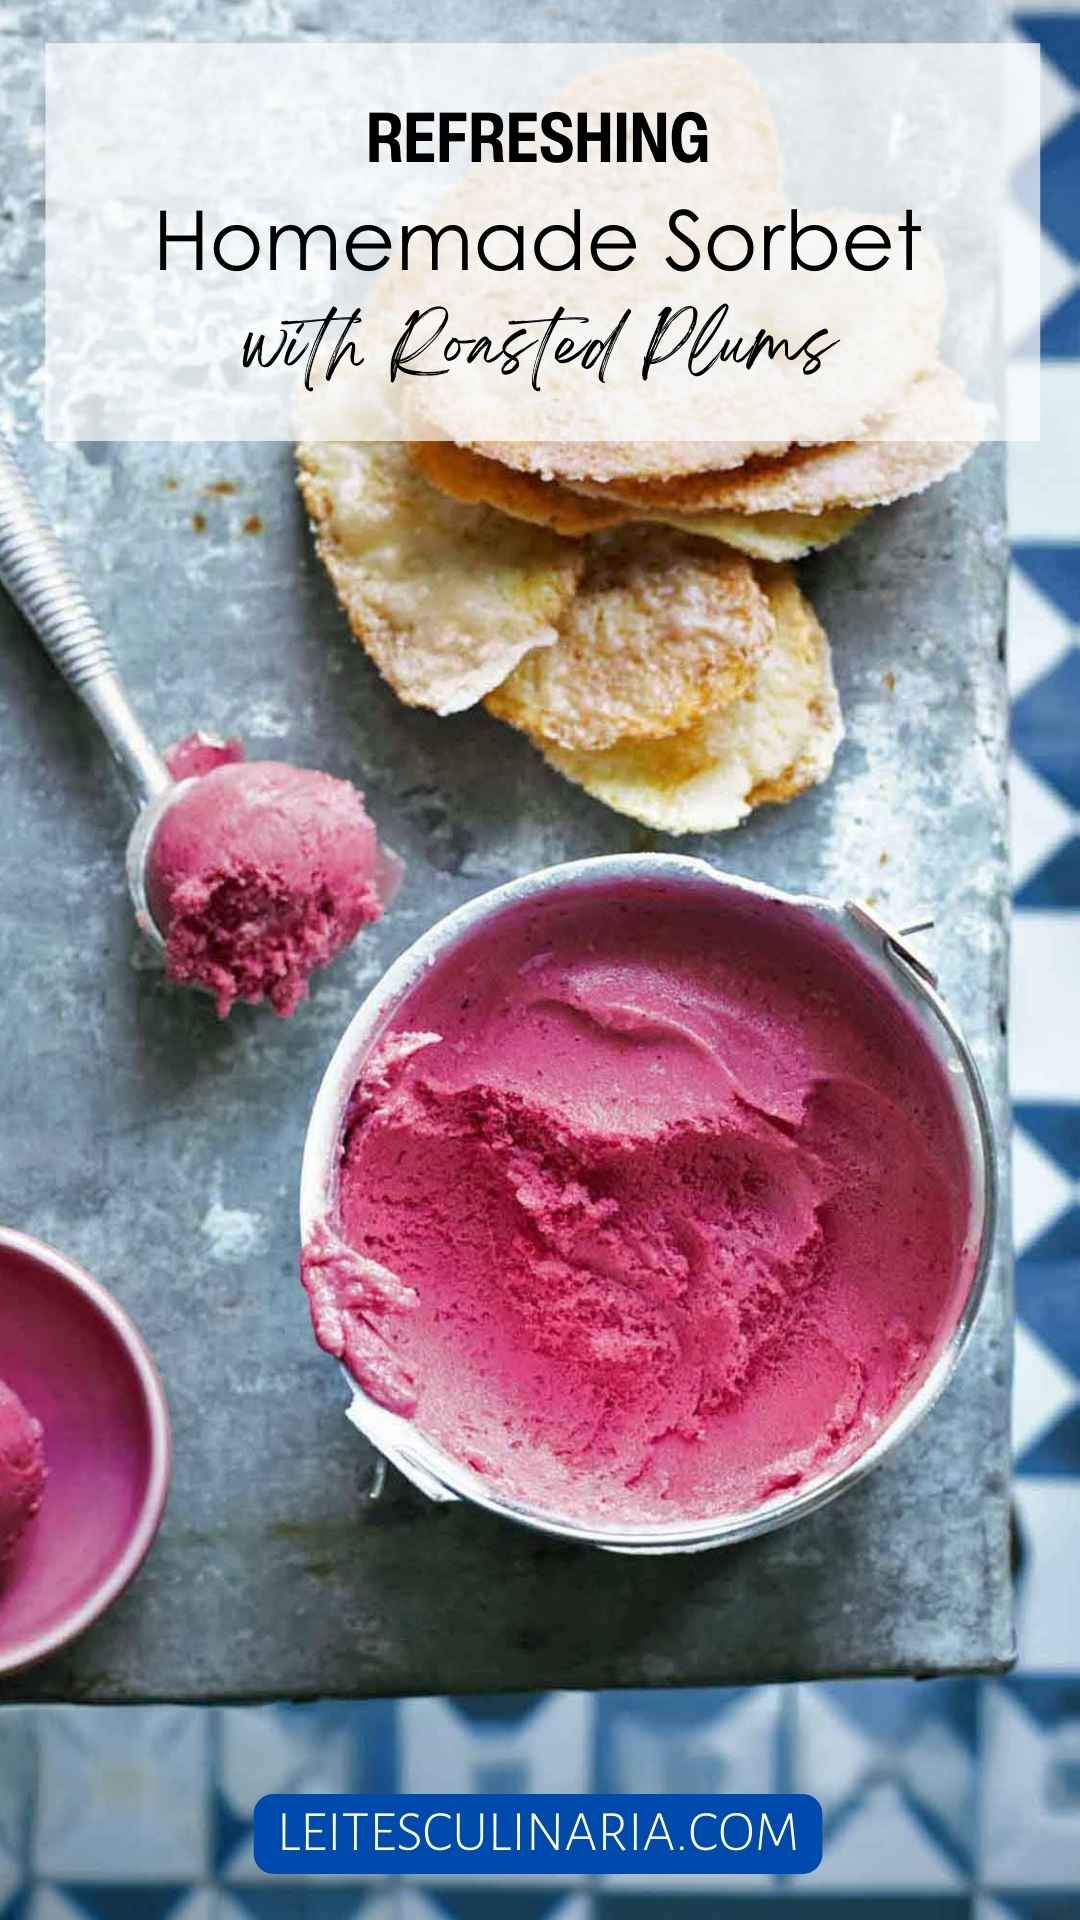 A small bucket of plum sorbet with a scoop of sorbet in a metal ice cream scoop nearby.